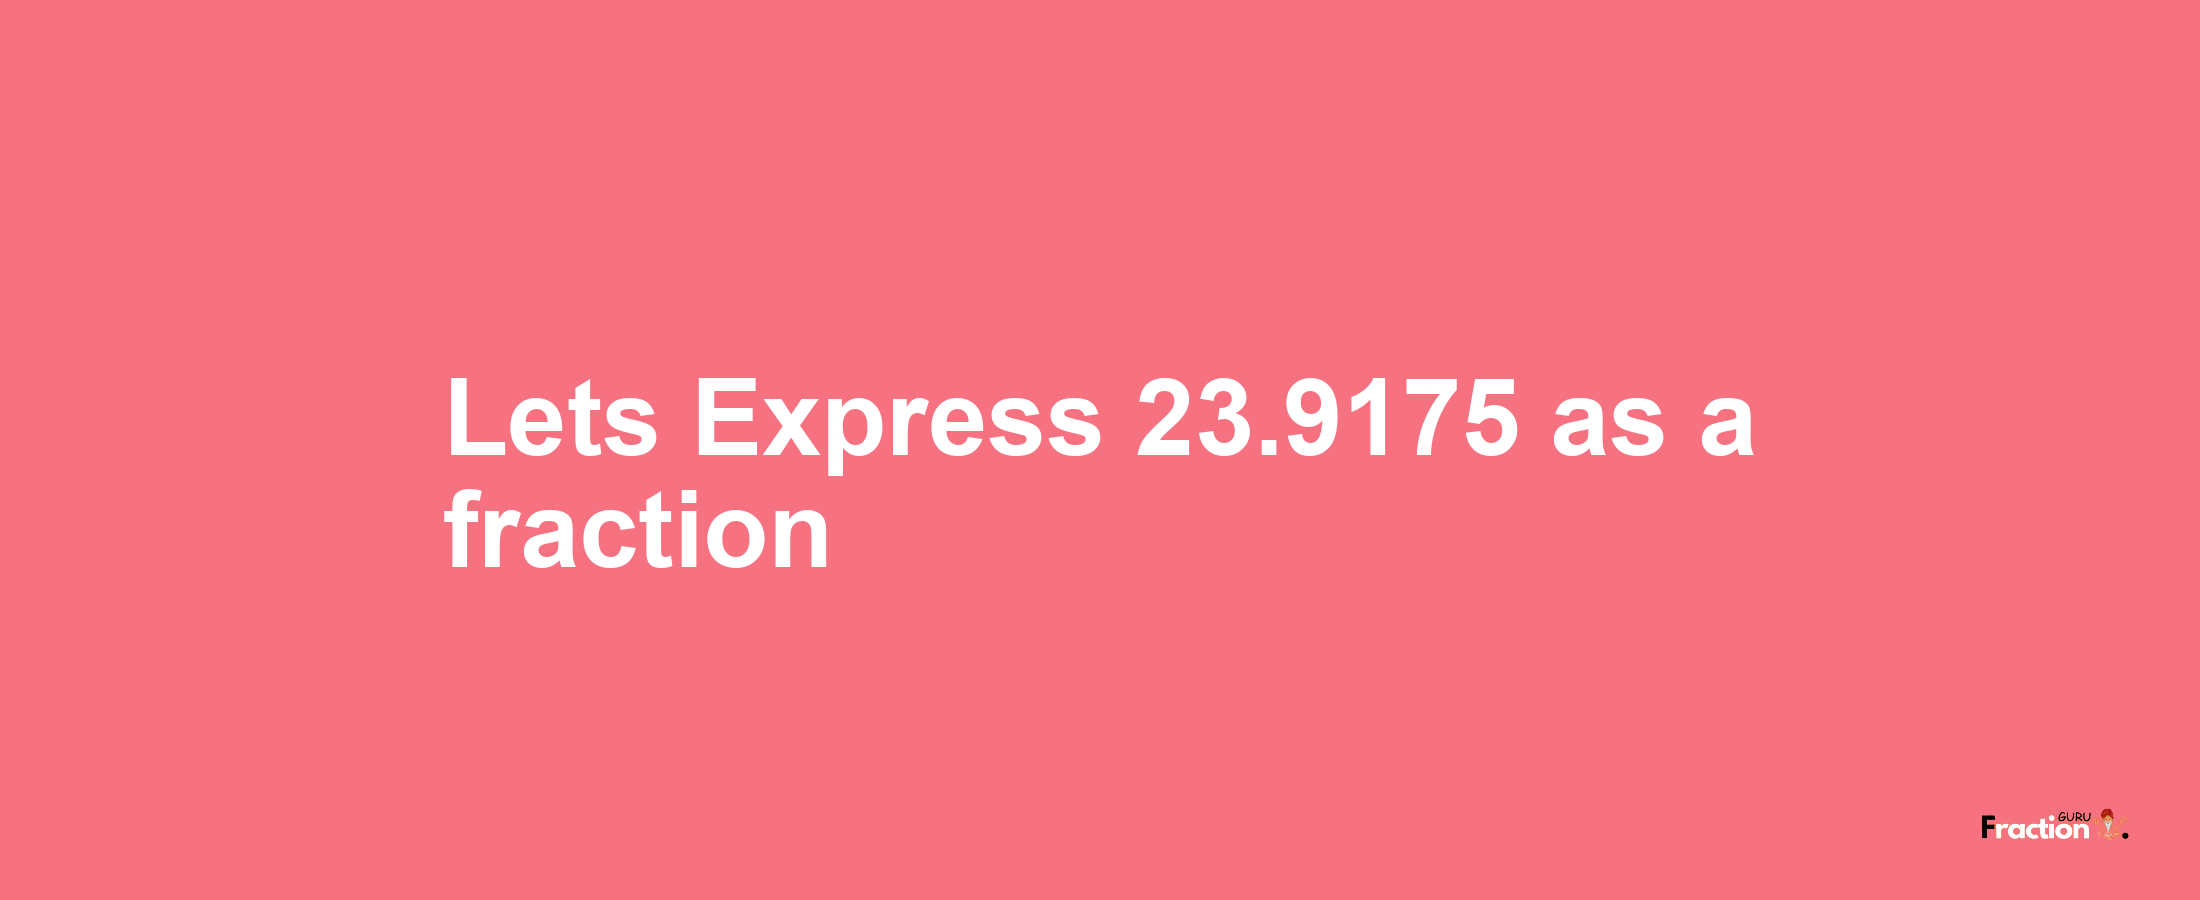 Lets Express 23.9175 as afraction